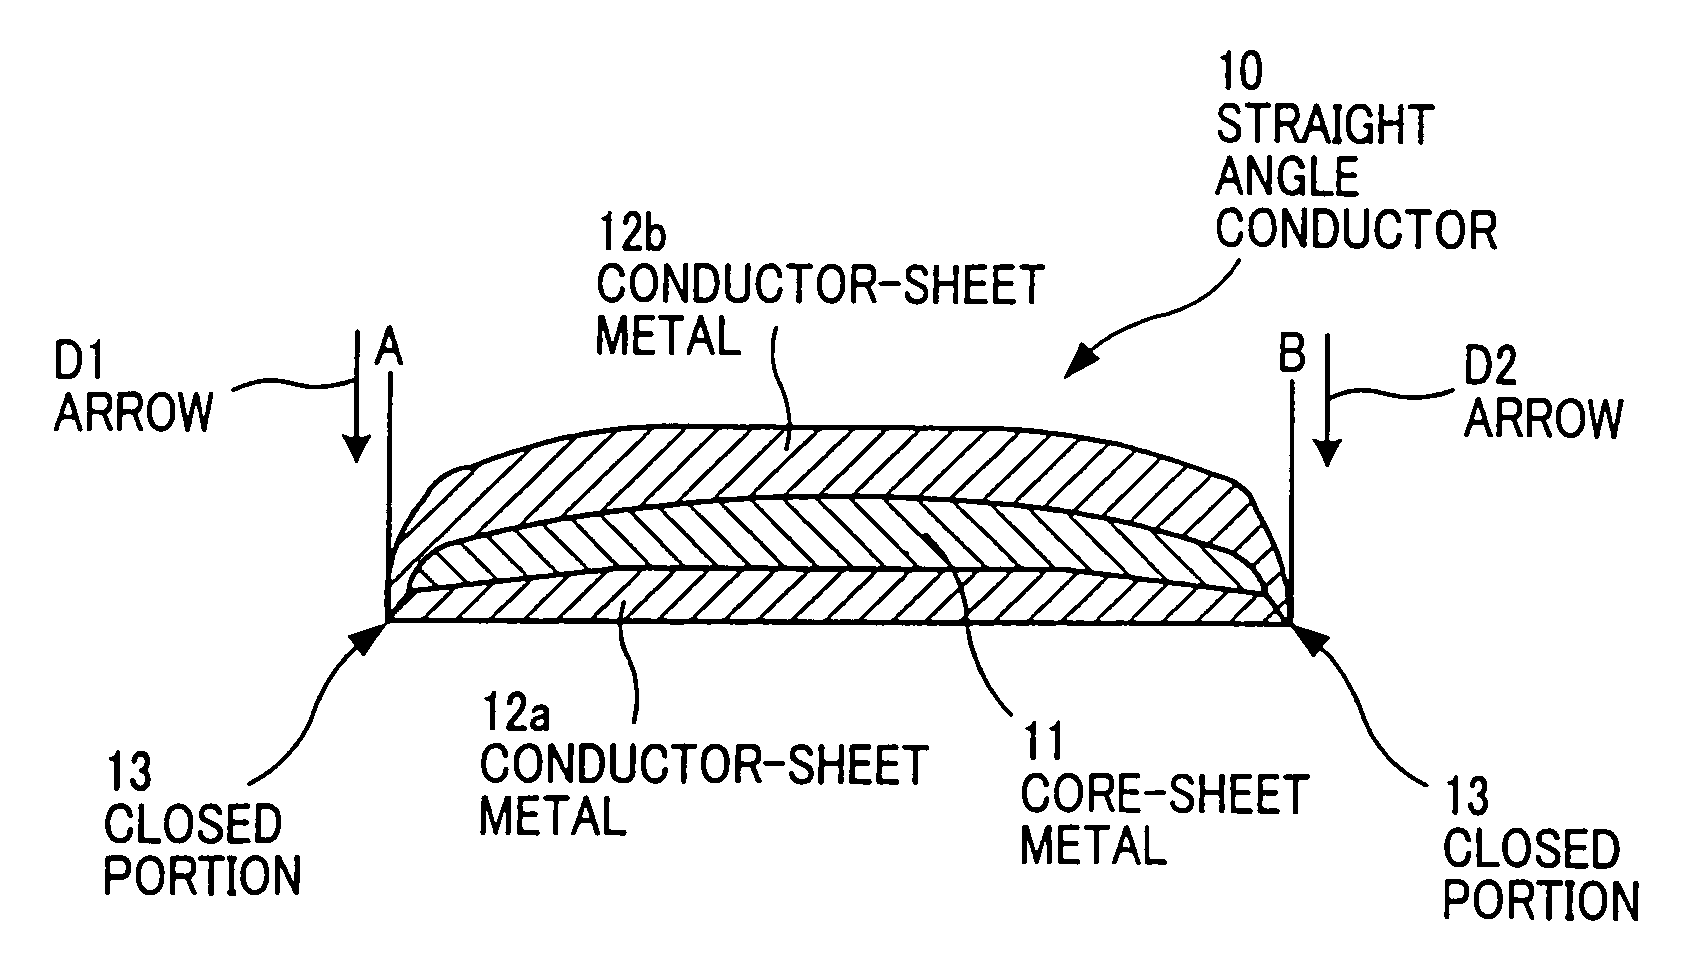 Straight angle conductor and method of manufacturing the same